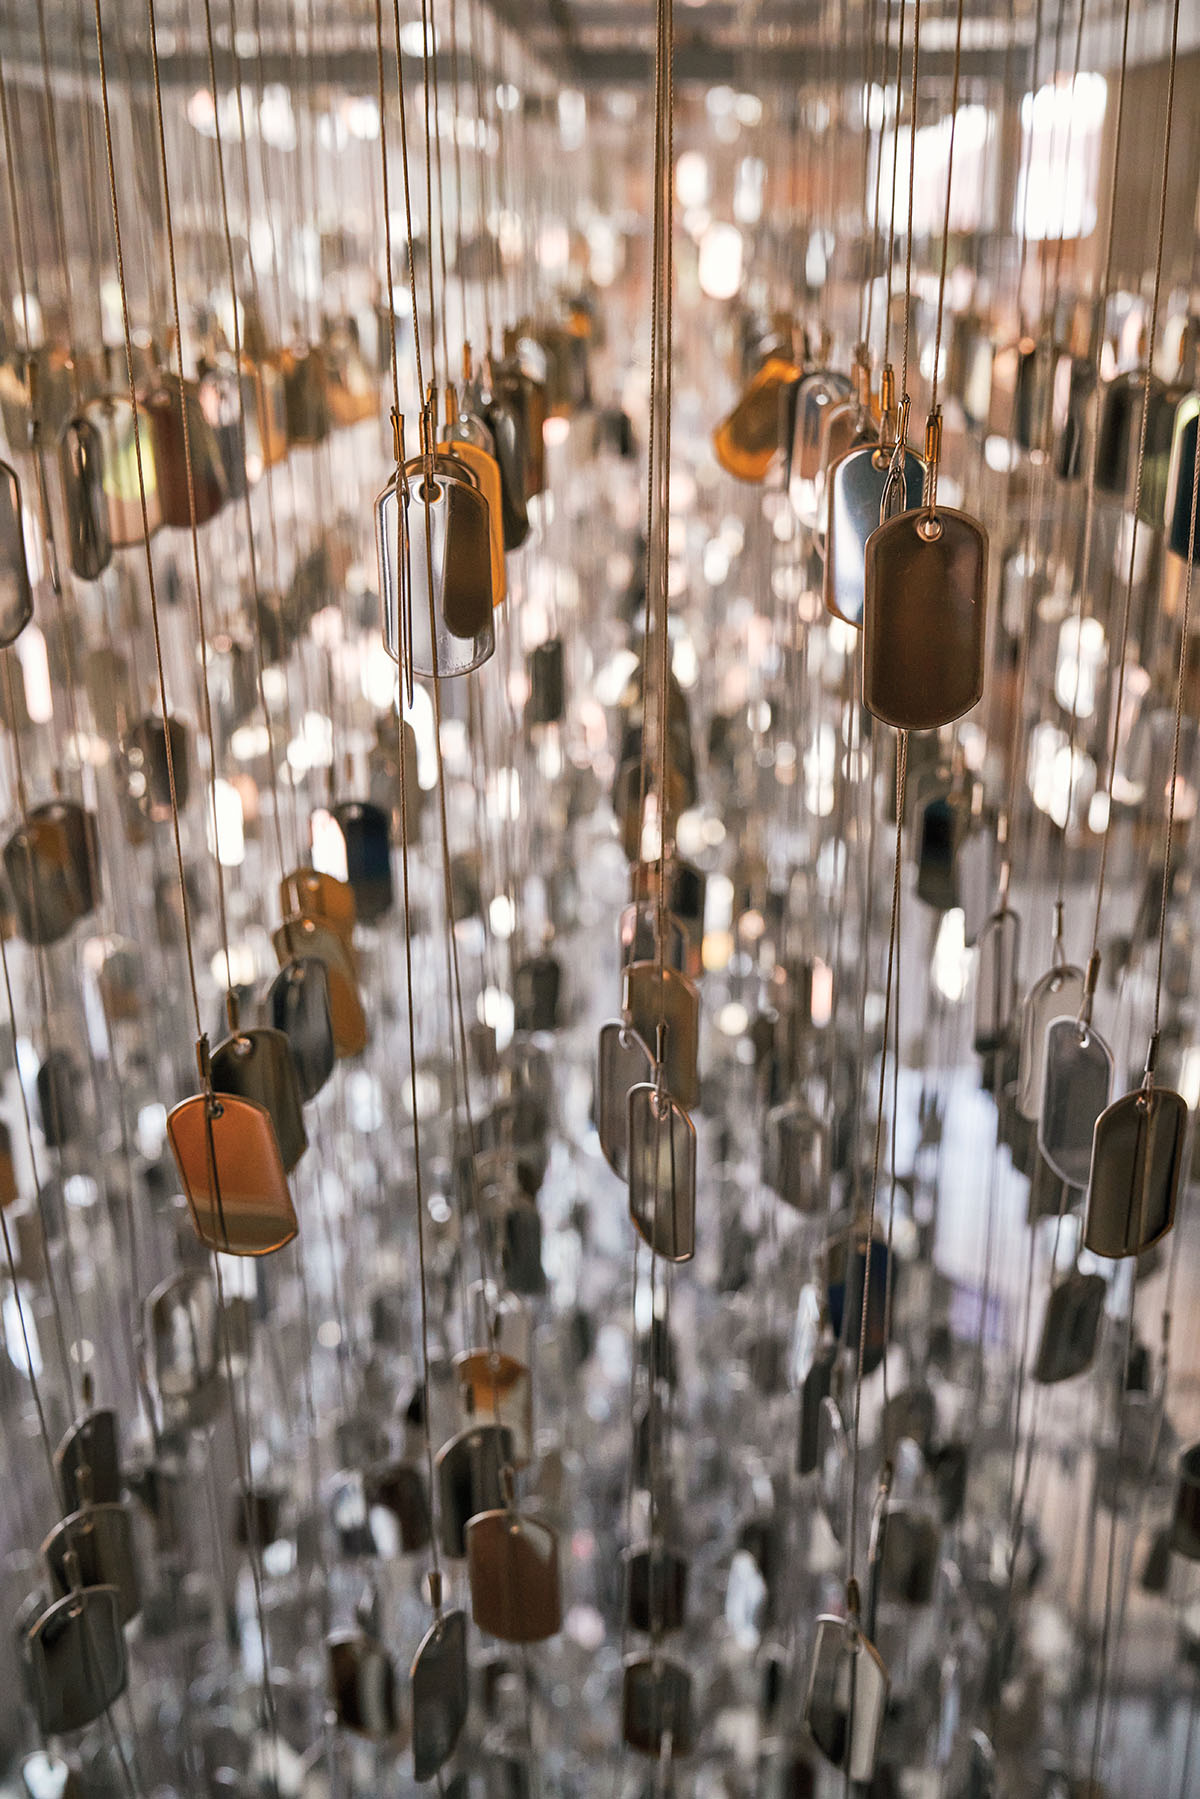 A large collection of reflective dog tags hang in front of a mirror